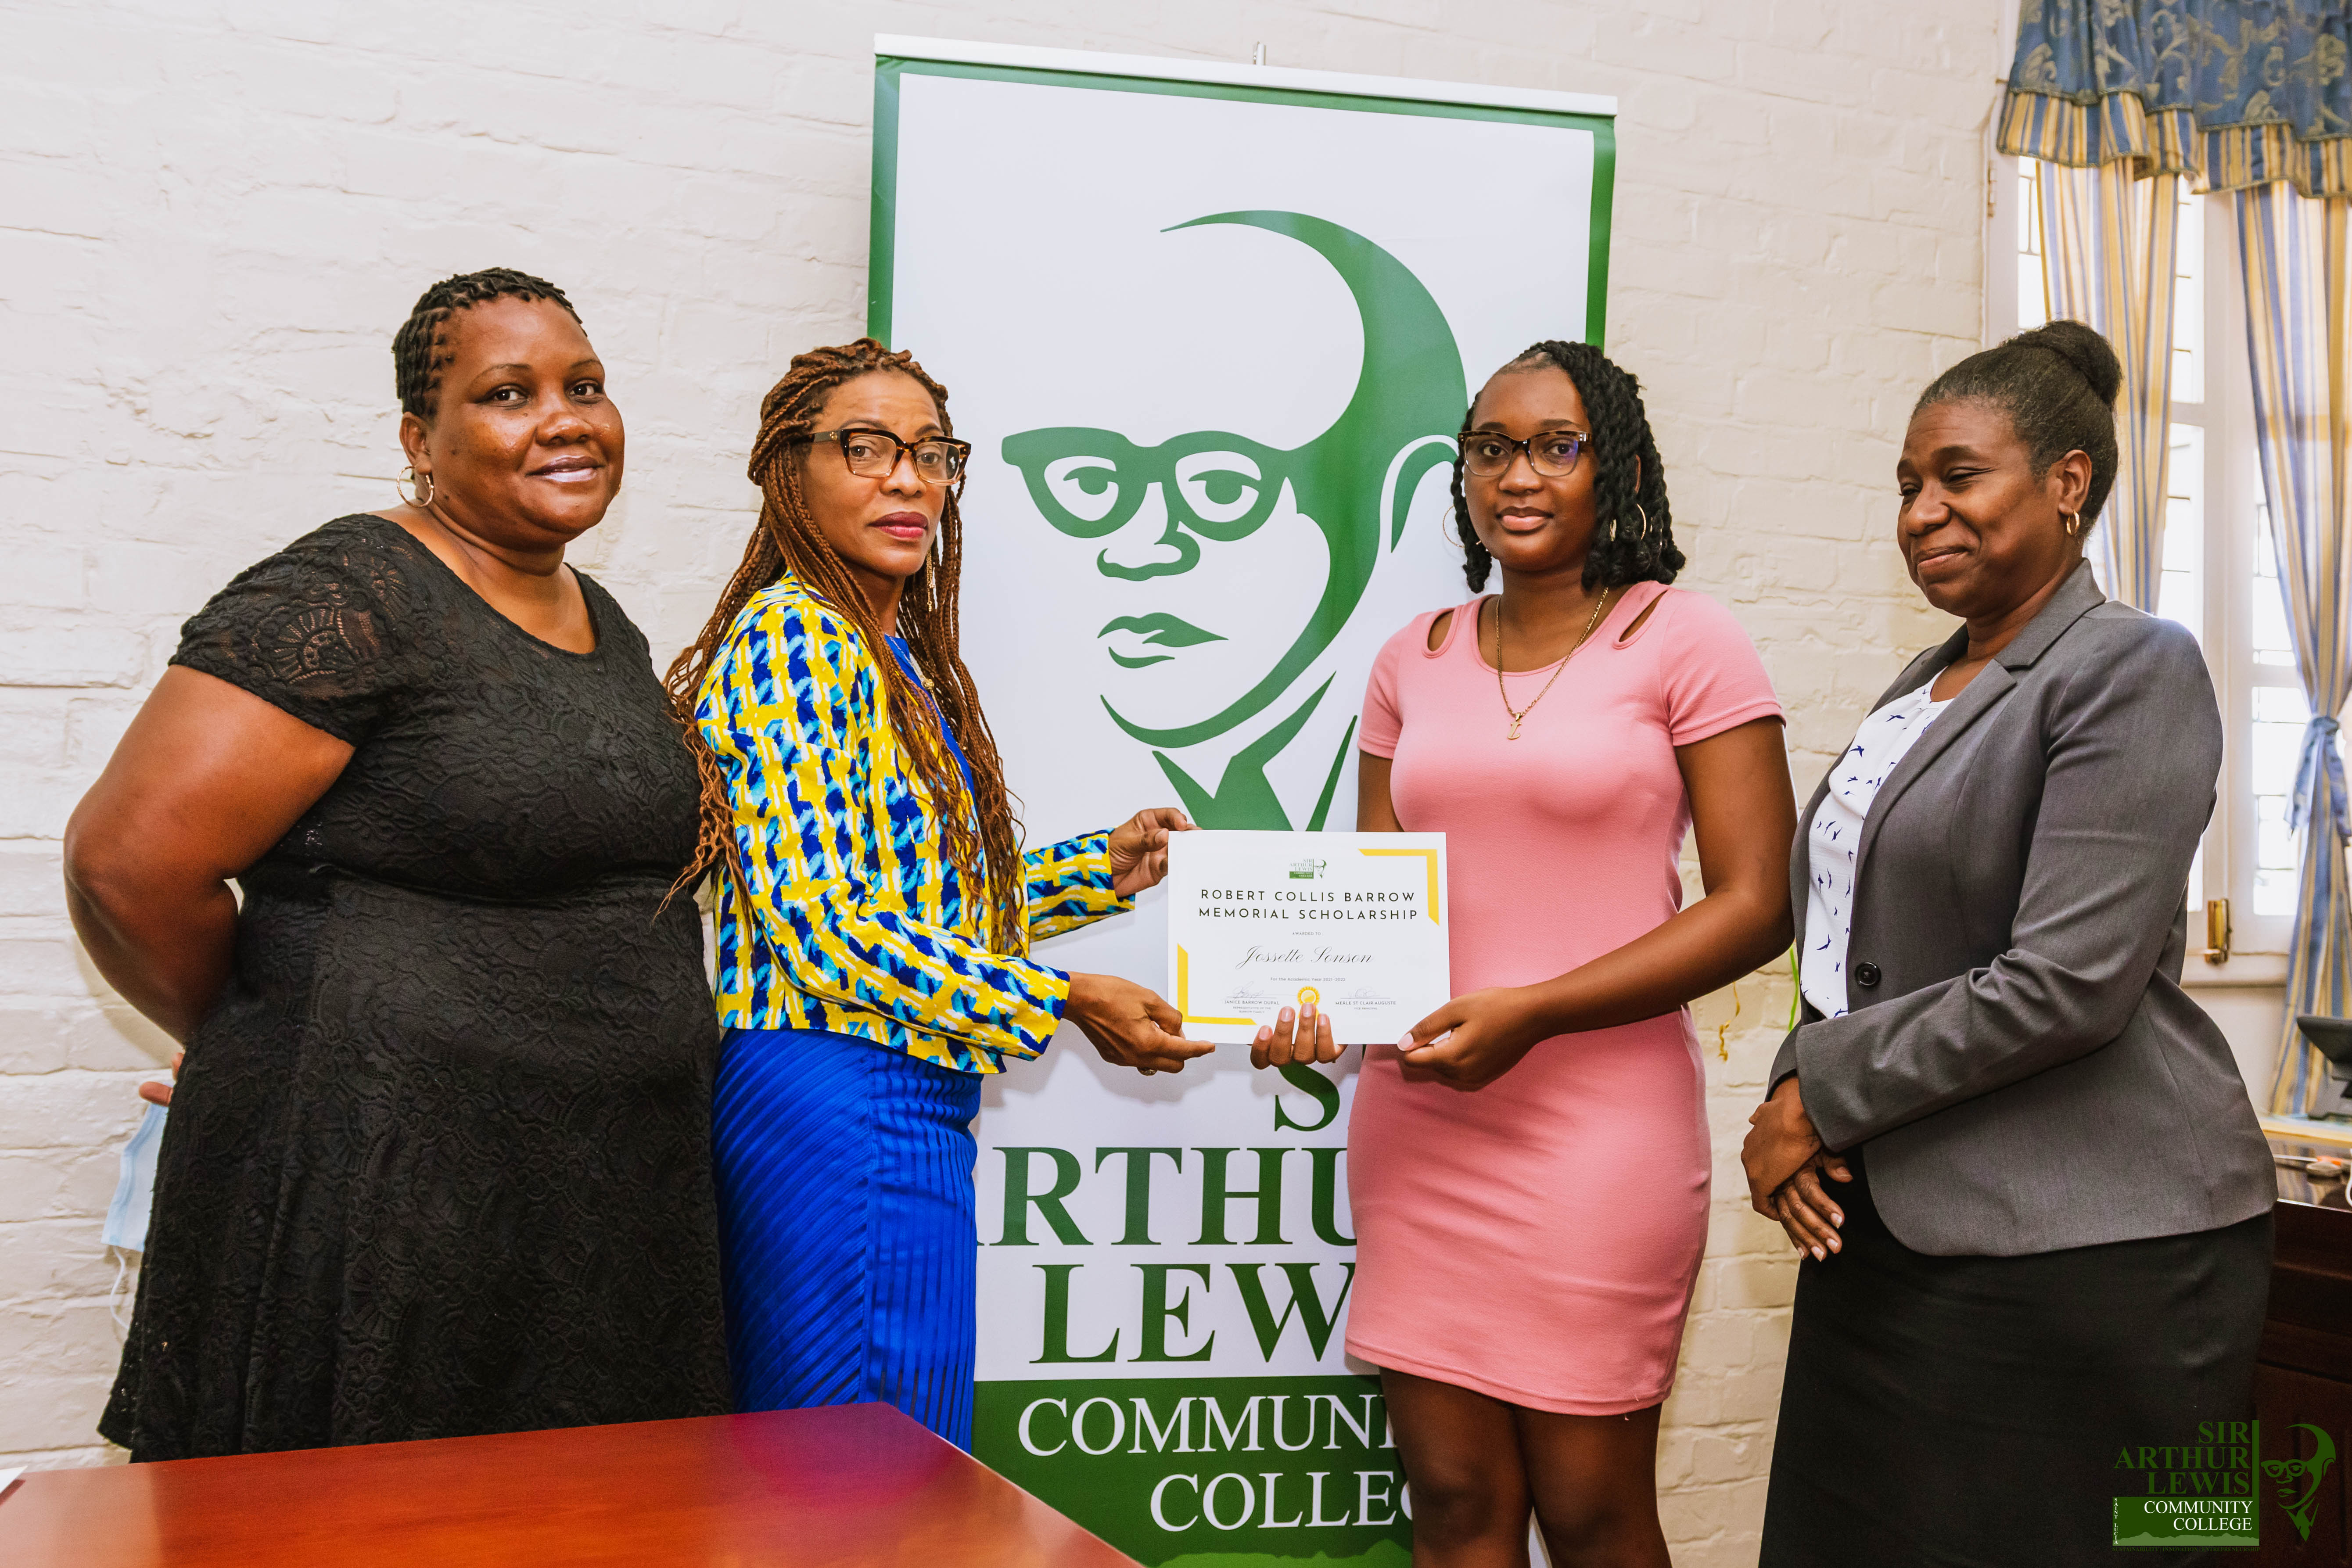 First year SALCC student, Ms. Jossette Sonson, was awarded the inaugural Robert Collis Barrow Memorial Scholarship.